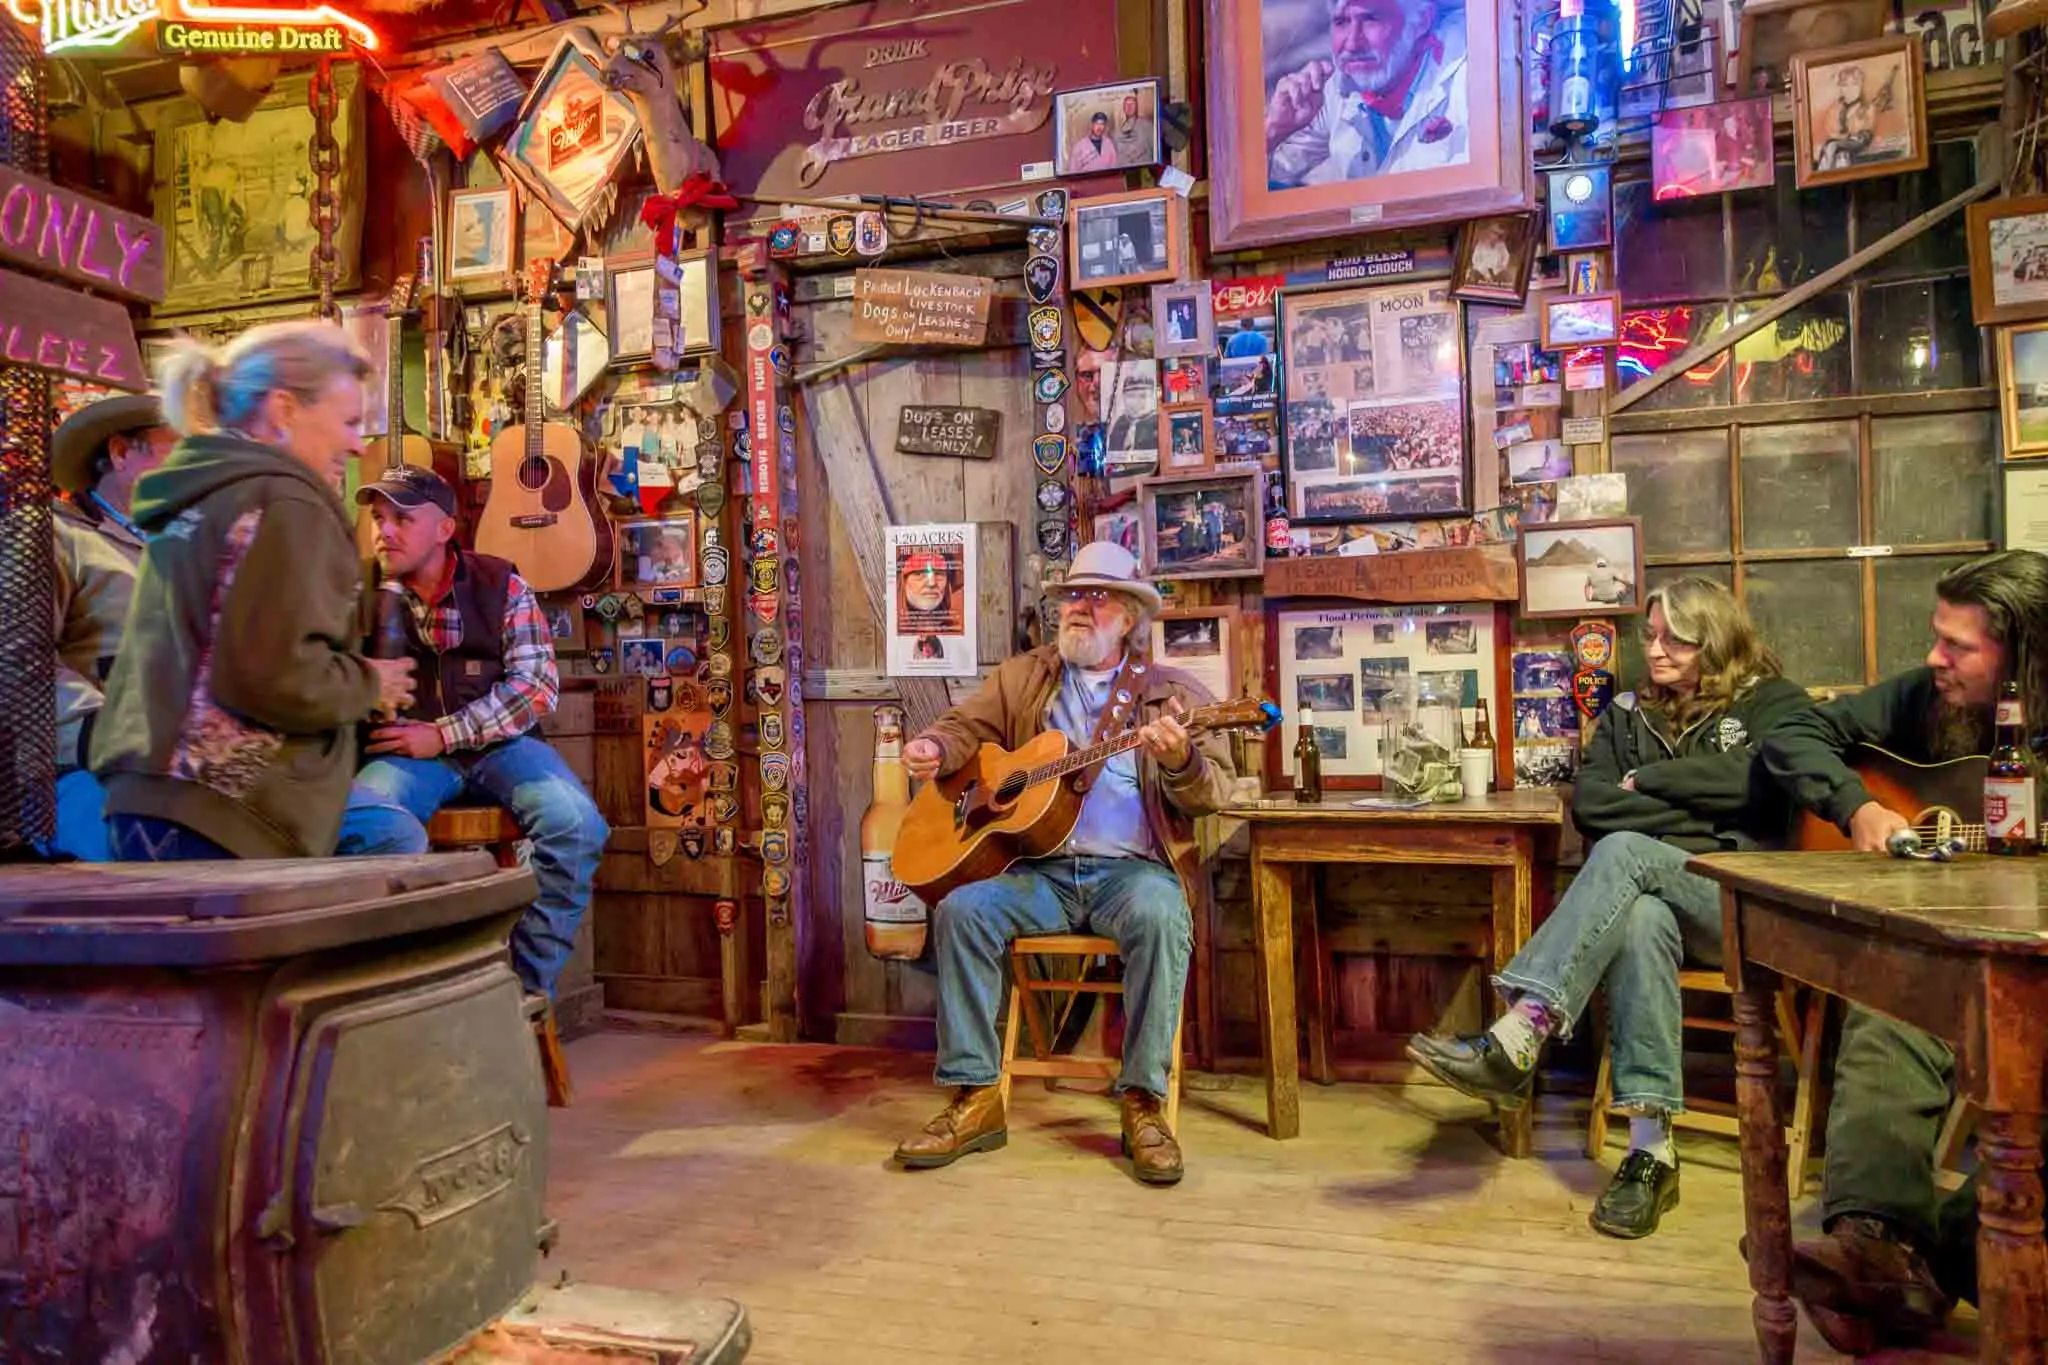 People watching a man play guitar in a bar with walls covered in memorabilia